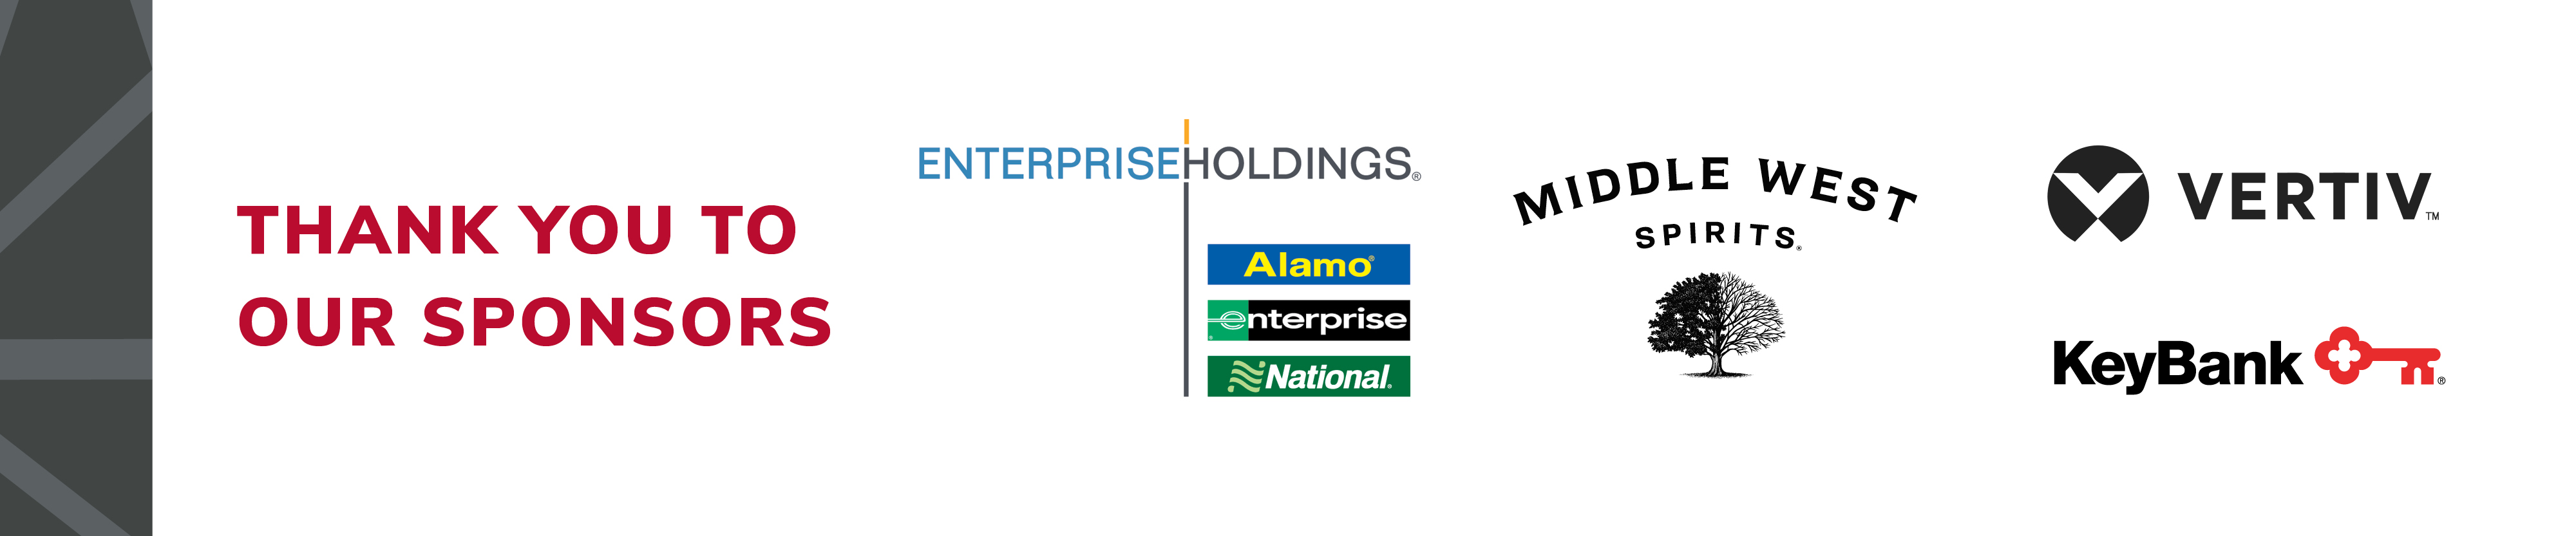 Thank you to our sponsors! Enterprise Holding, Middle West Spirits, Vertiv and Keybank